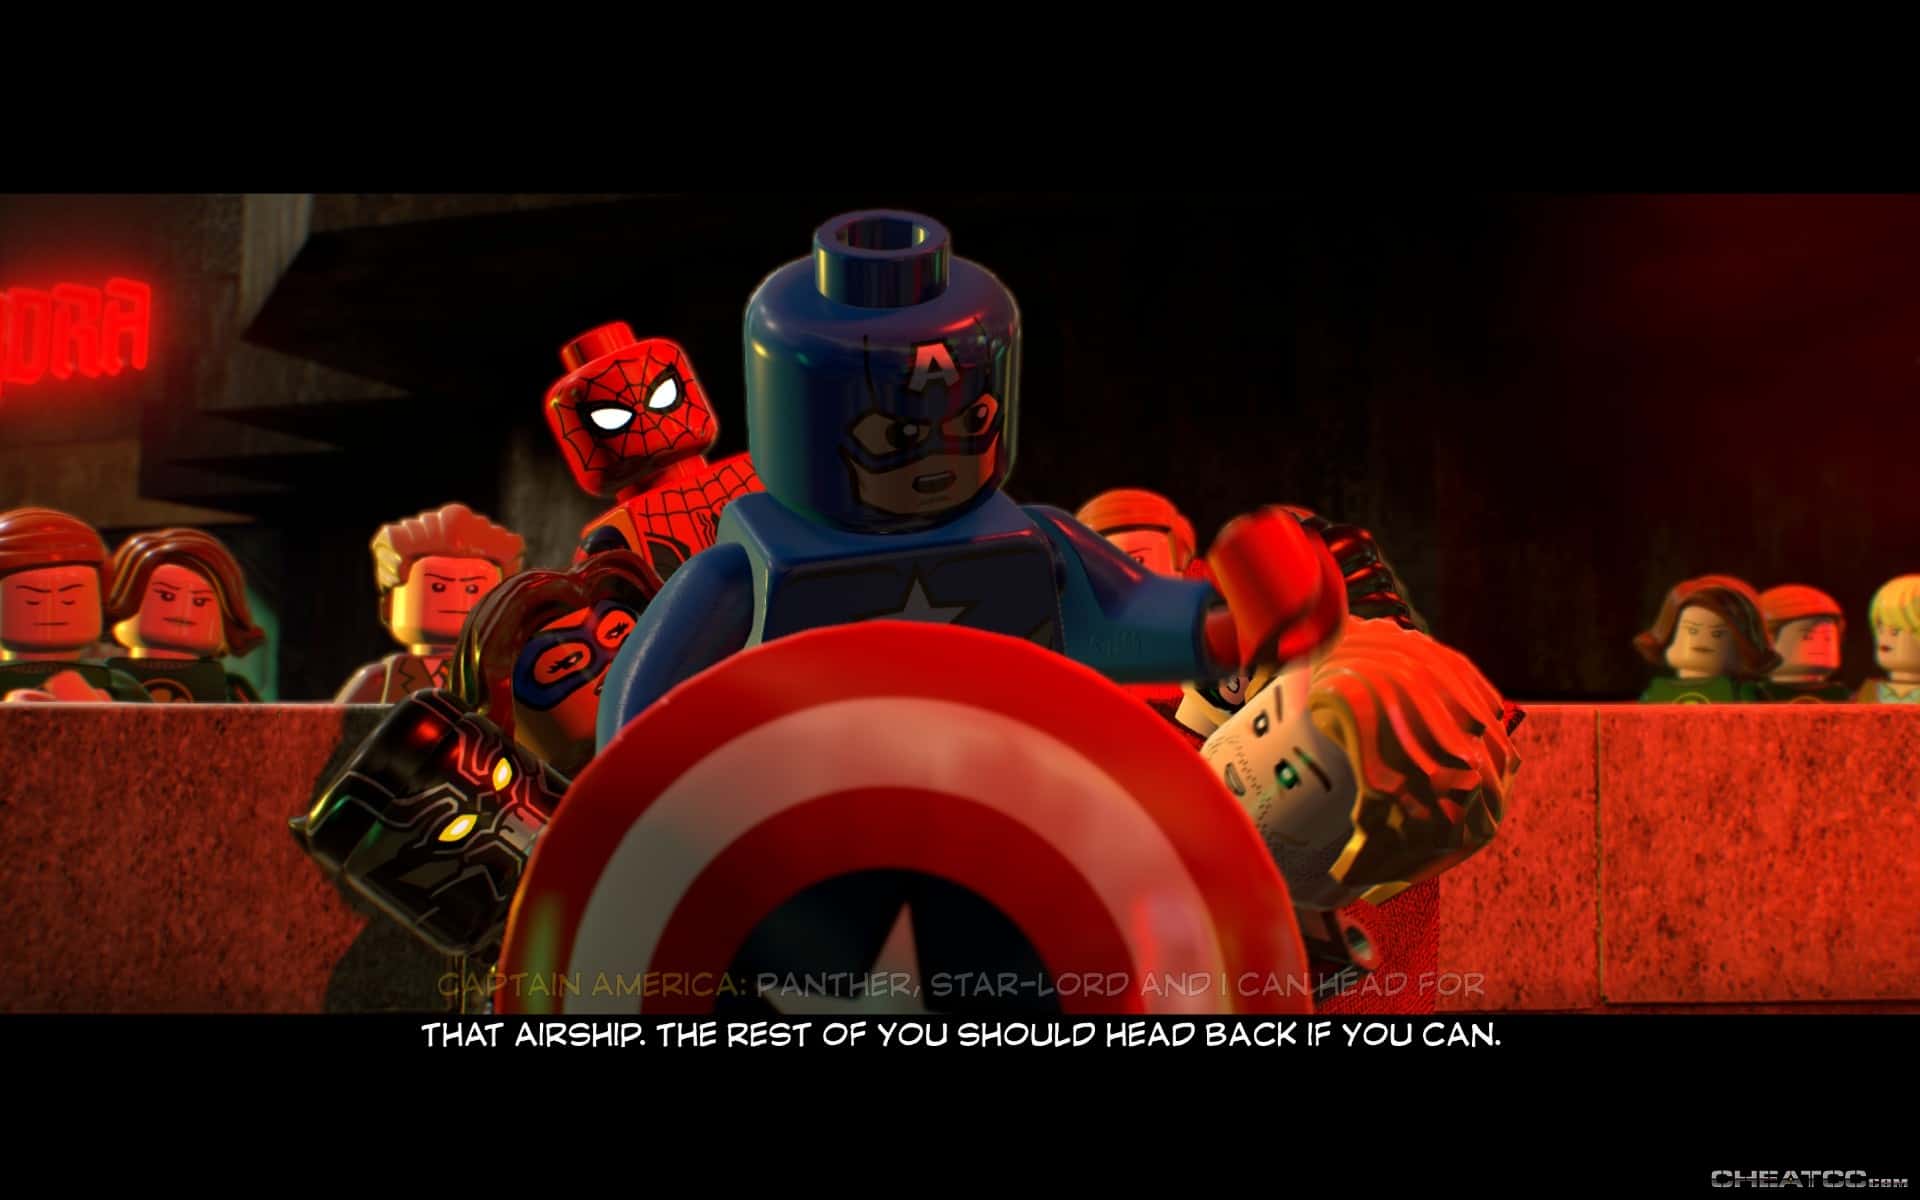 LEGO Marvel Super Heroes 3 Should Finally Fly The Nest